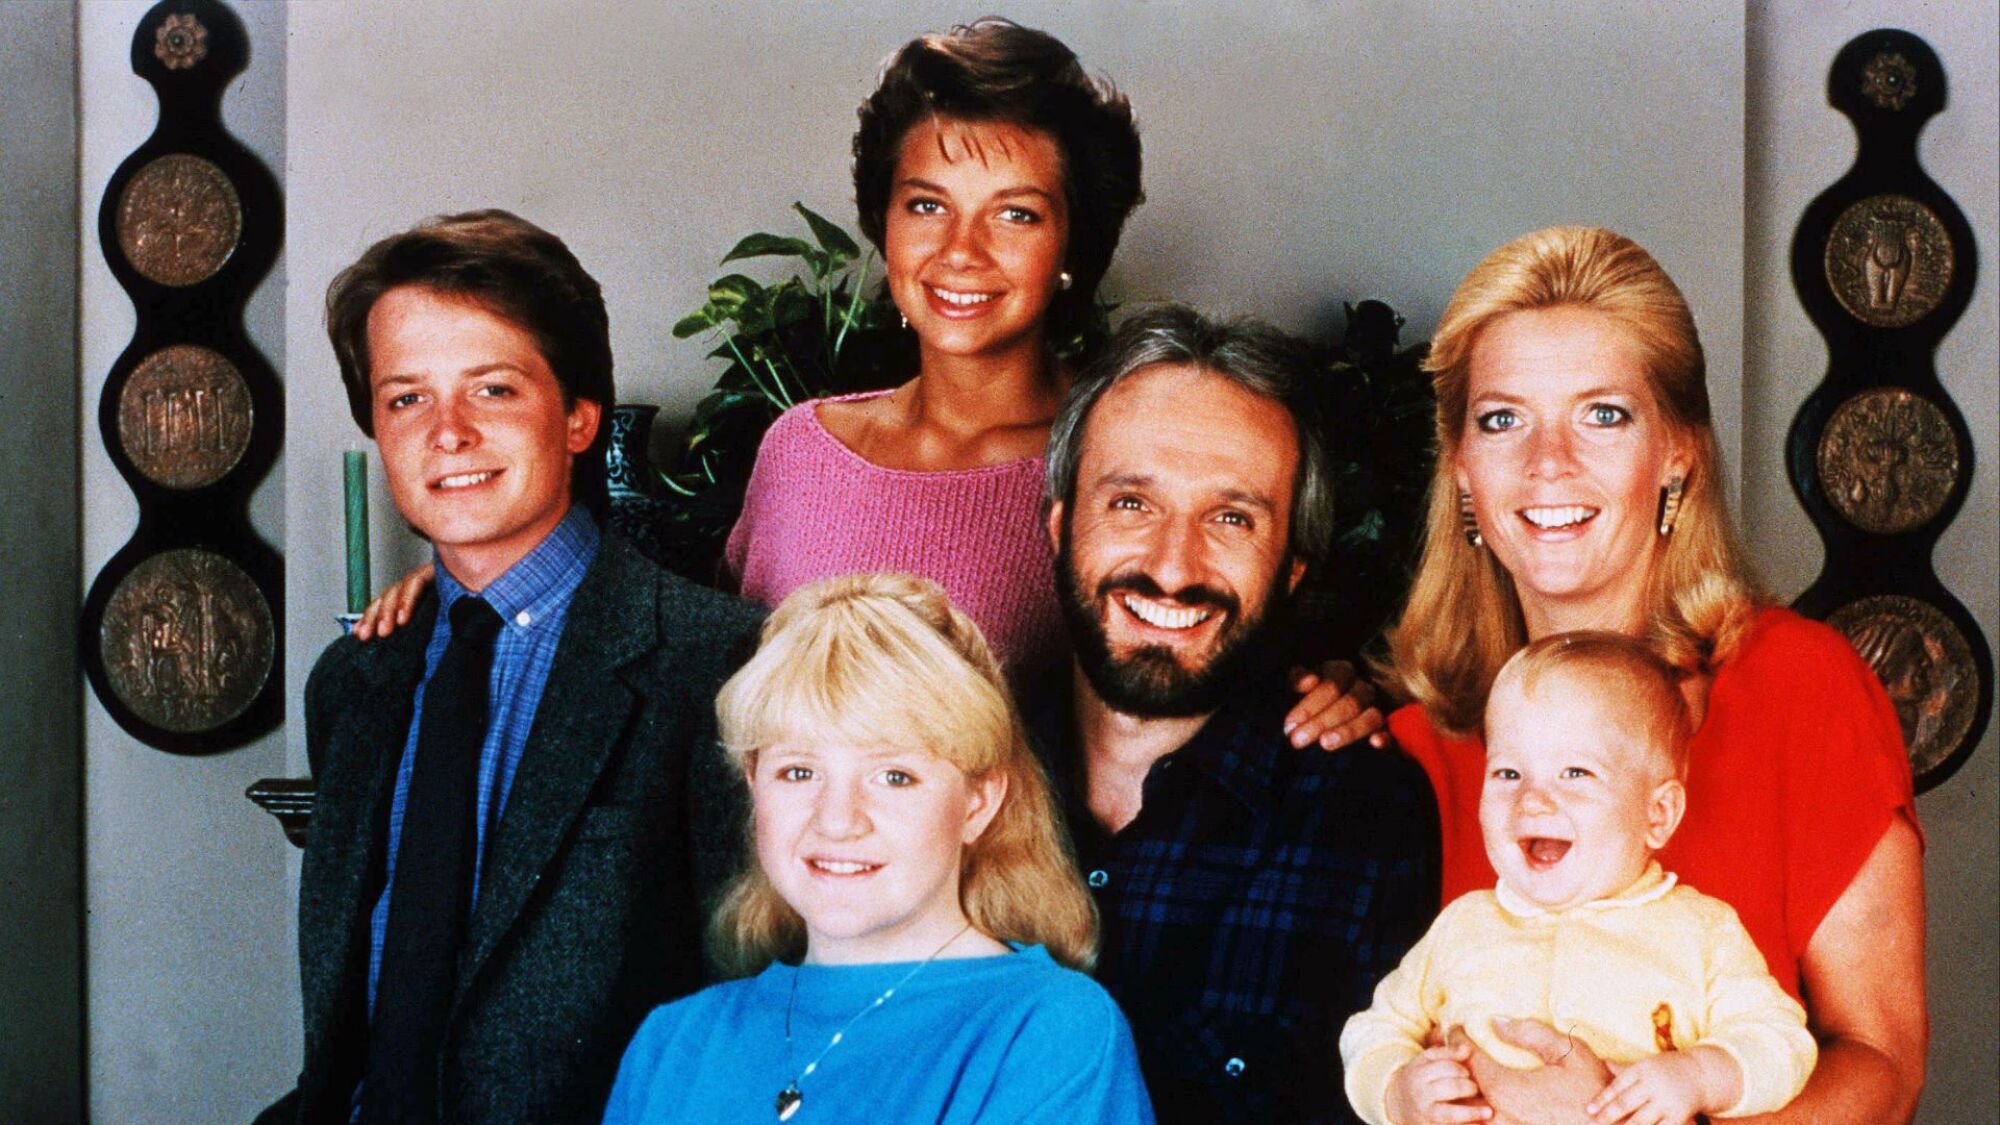 Michael J. Fox, Justine Bateman, Michael Gross, Meredith Baxter Birney, and Tina Yothers in "Family Ties"